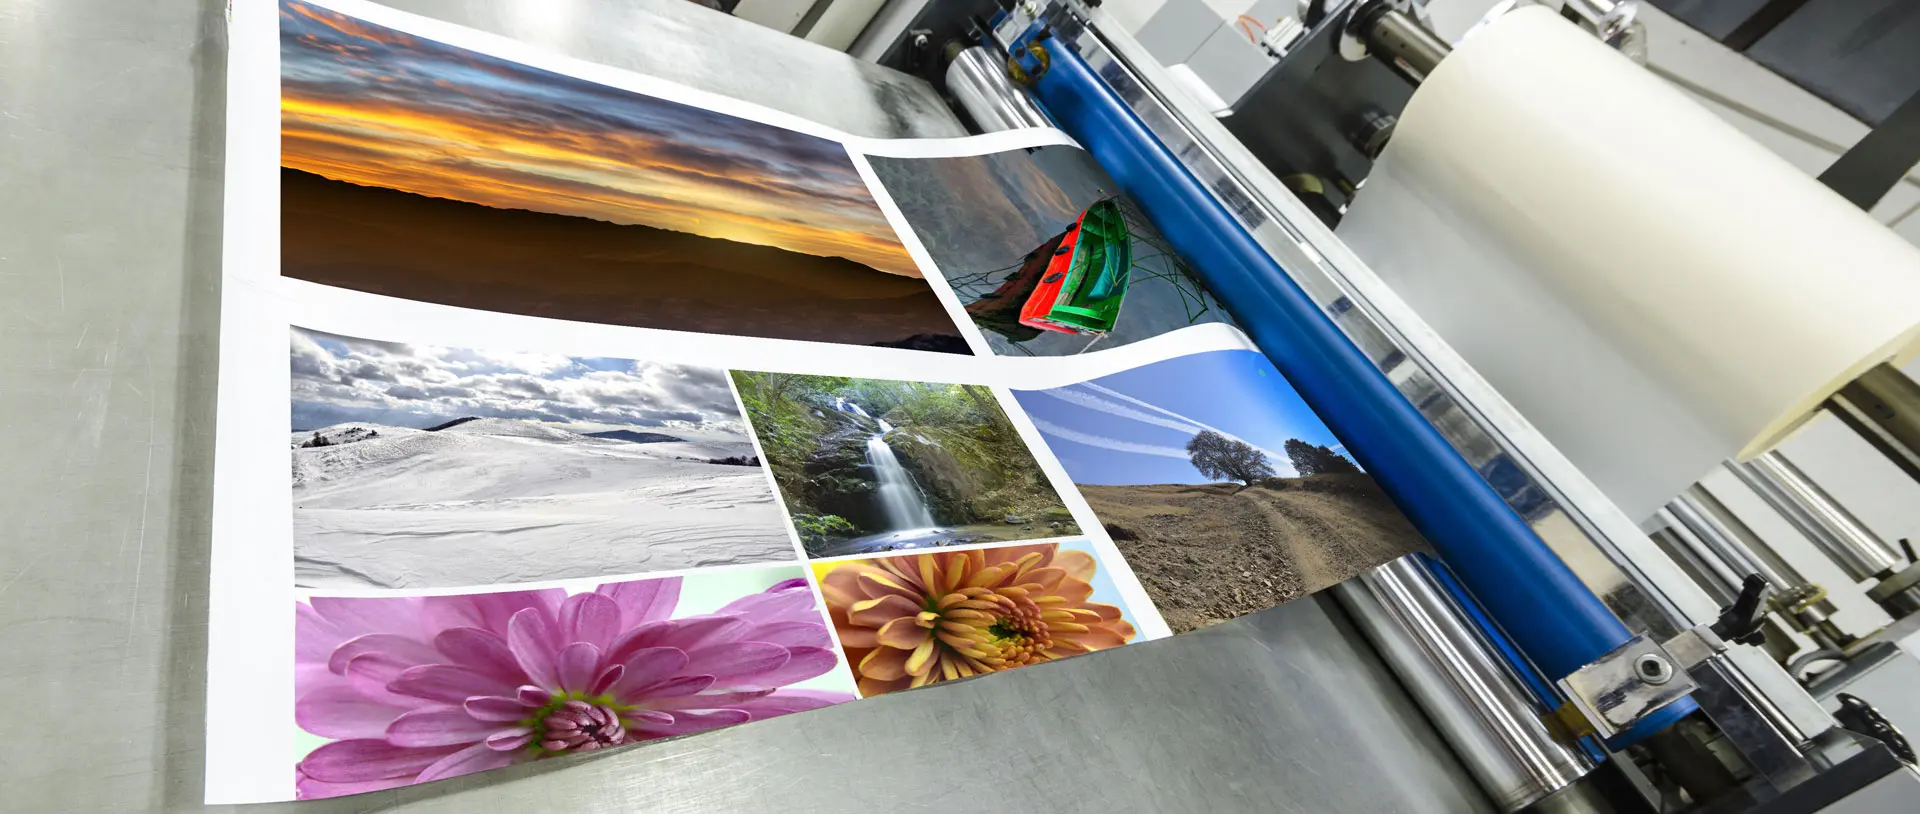 Printed sheet coming out from printing machine